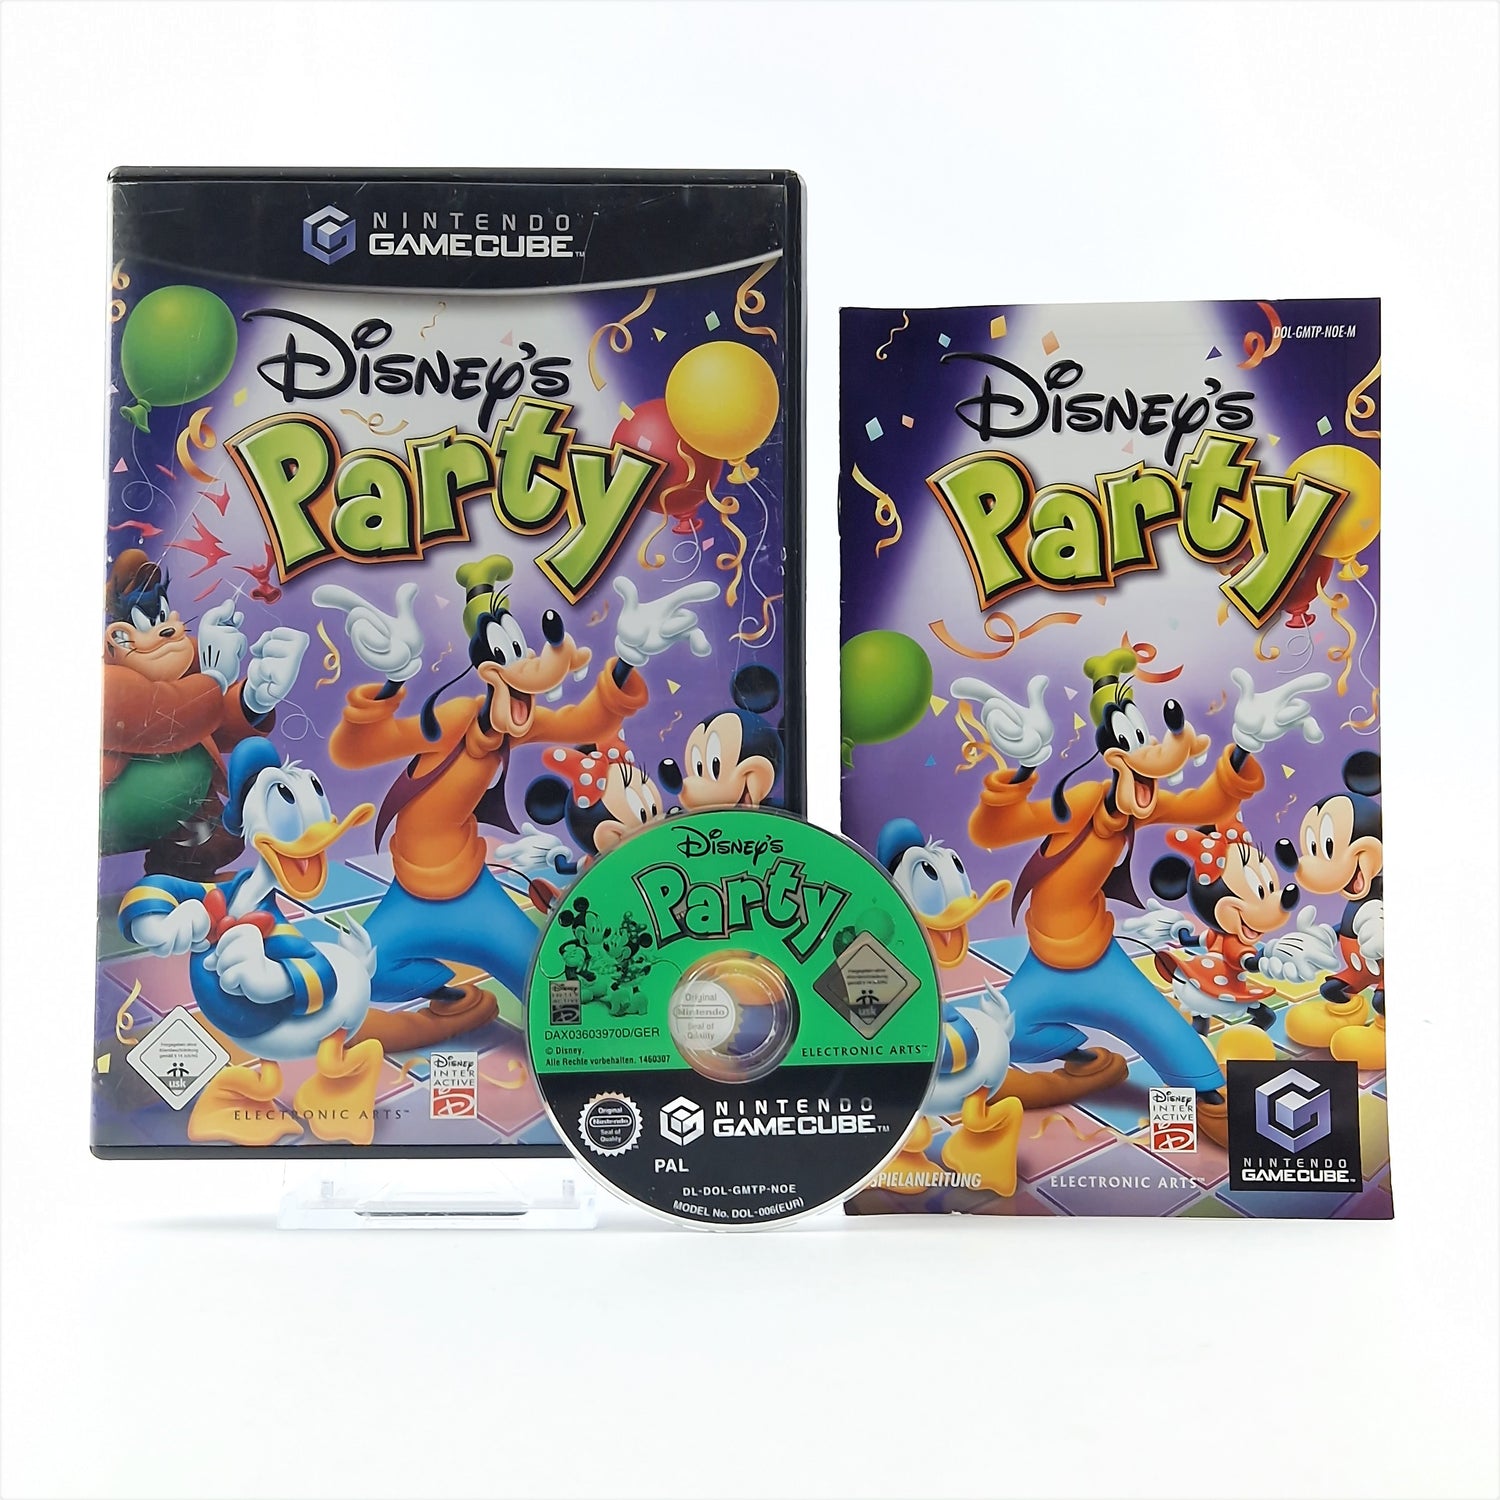 Nintendo Gamecube Game: Disney's Party - CD Instructions OVP / GC PAL Game